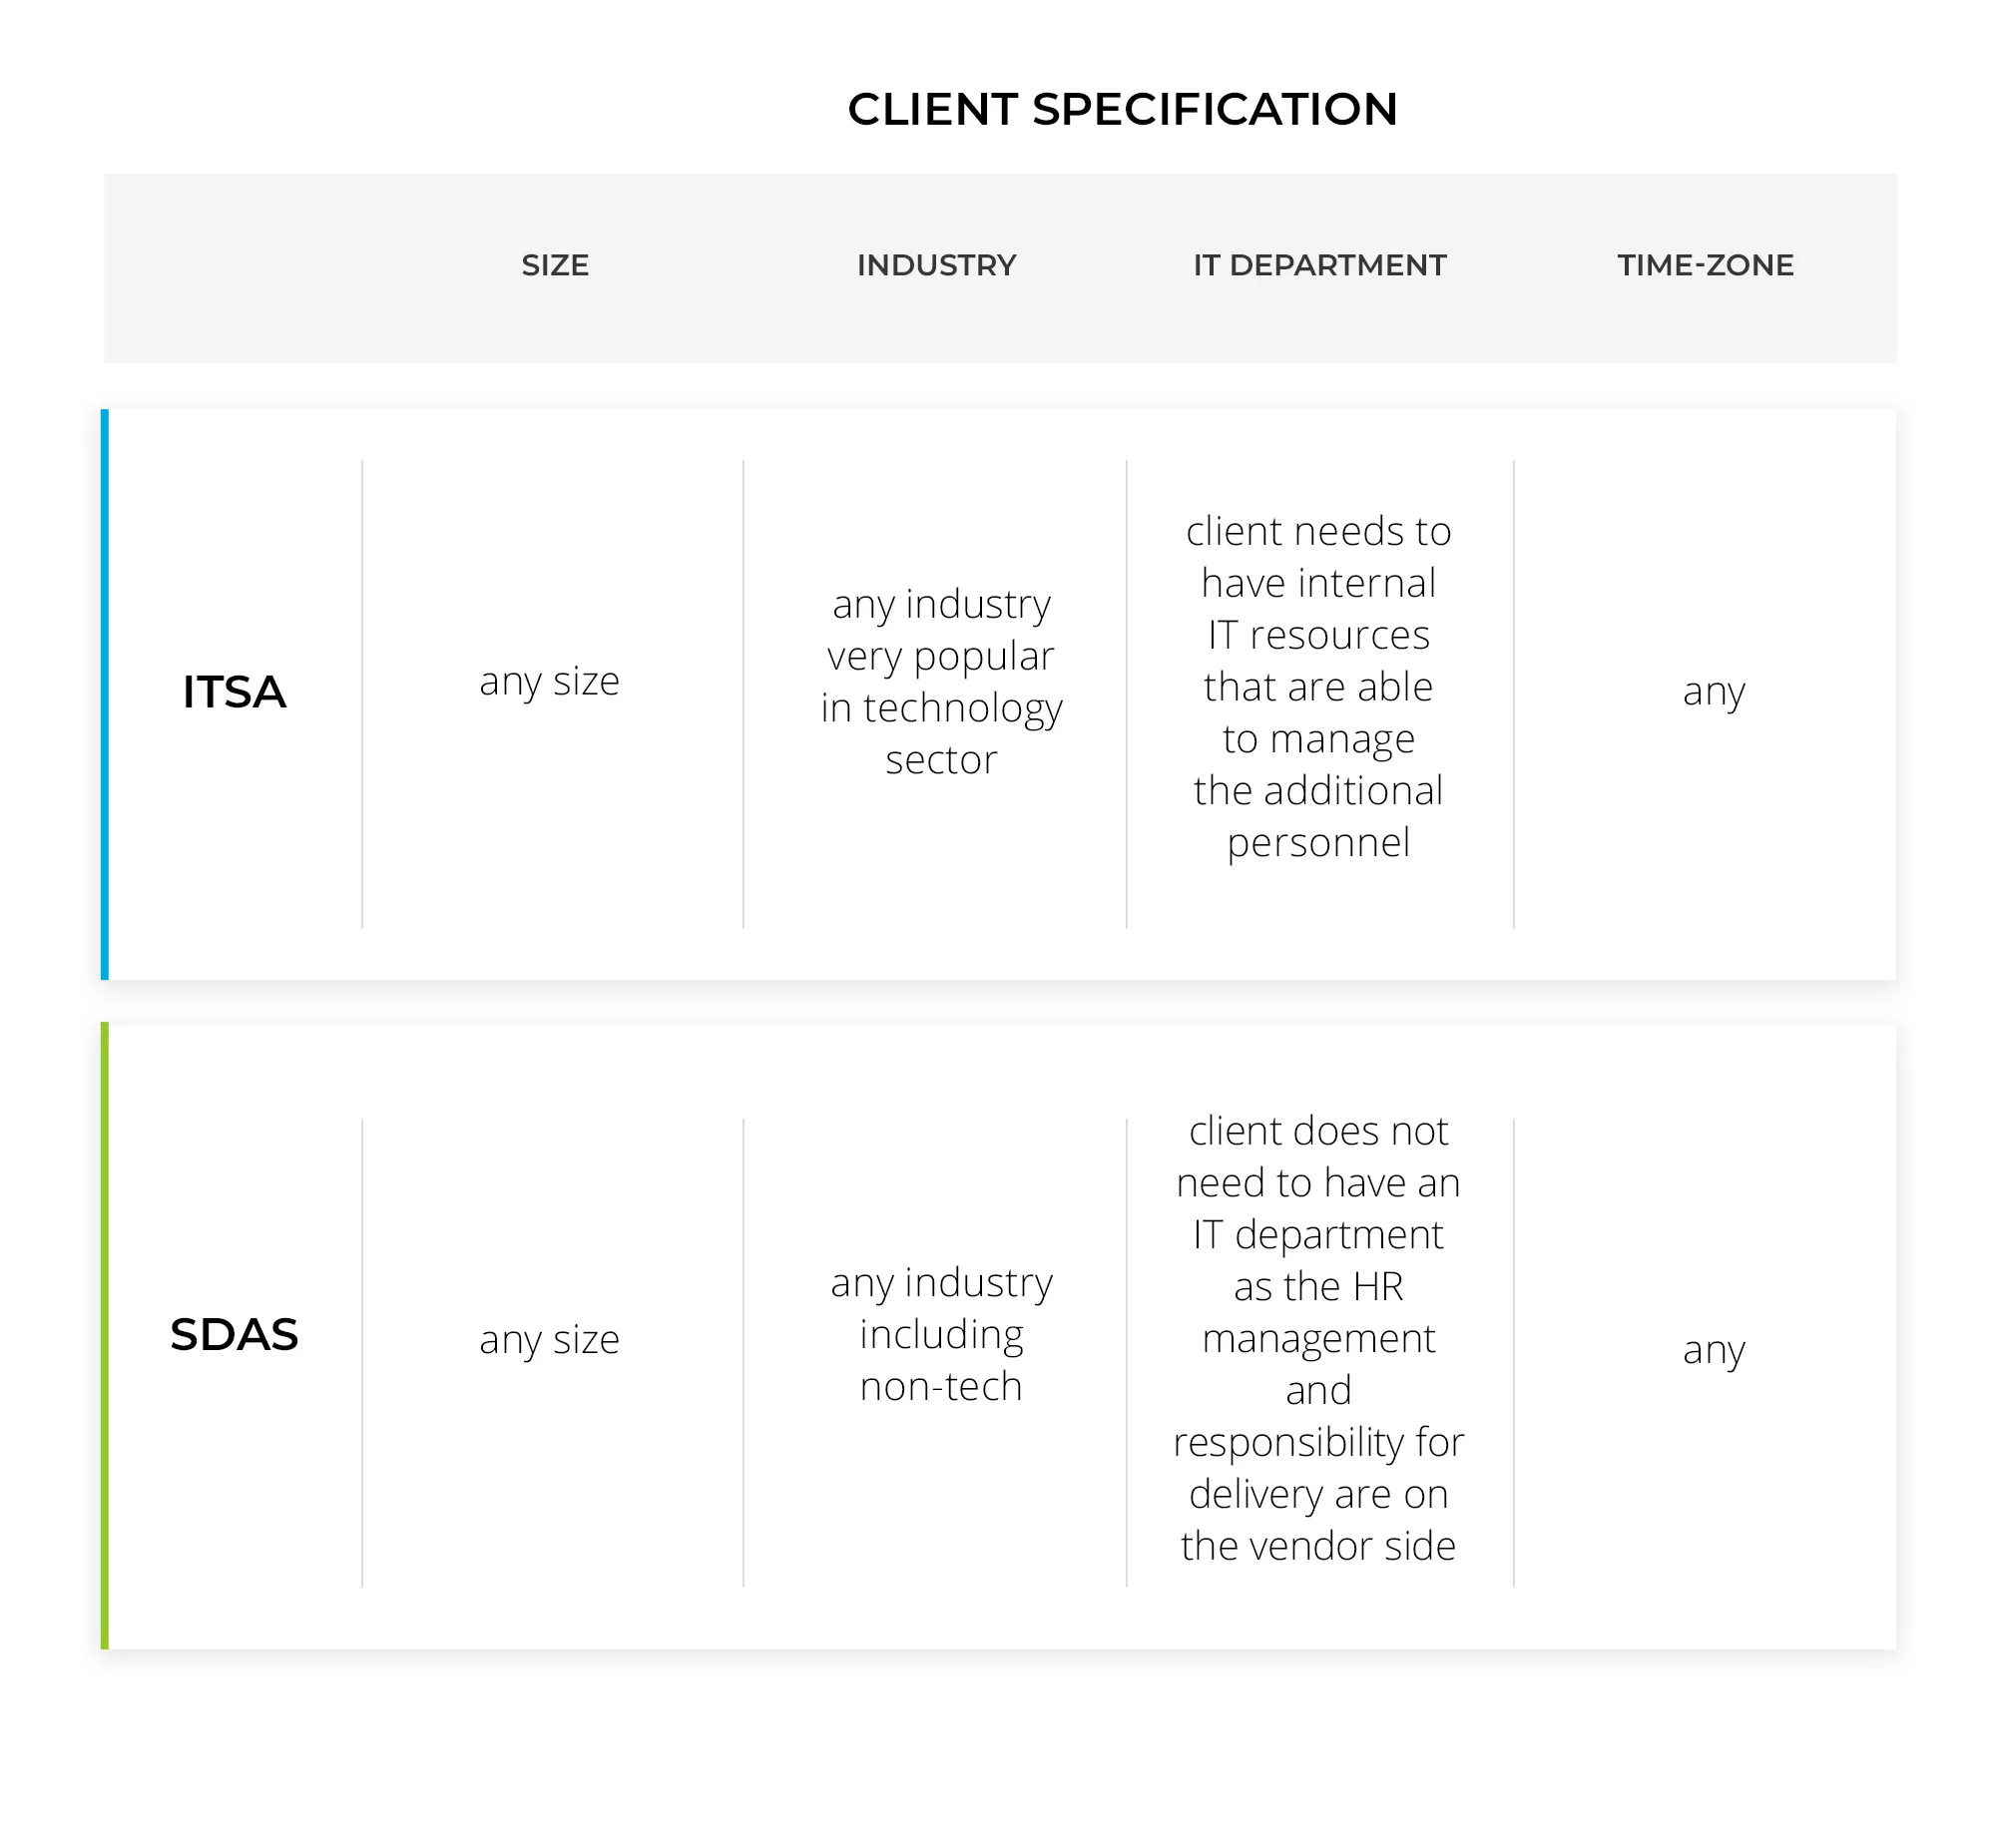 Client specifications staff augmentation as a service versus software development as a service